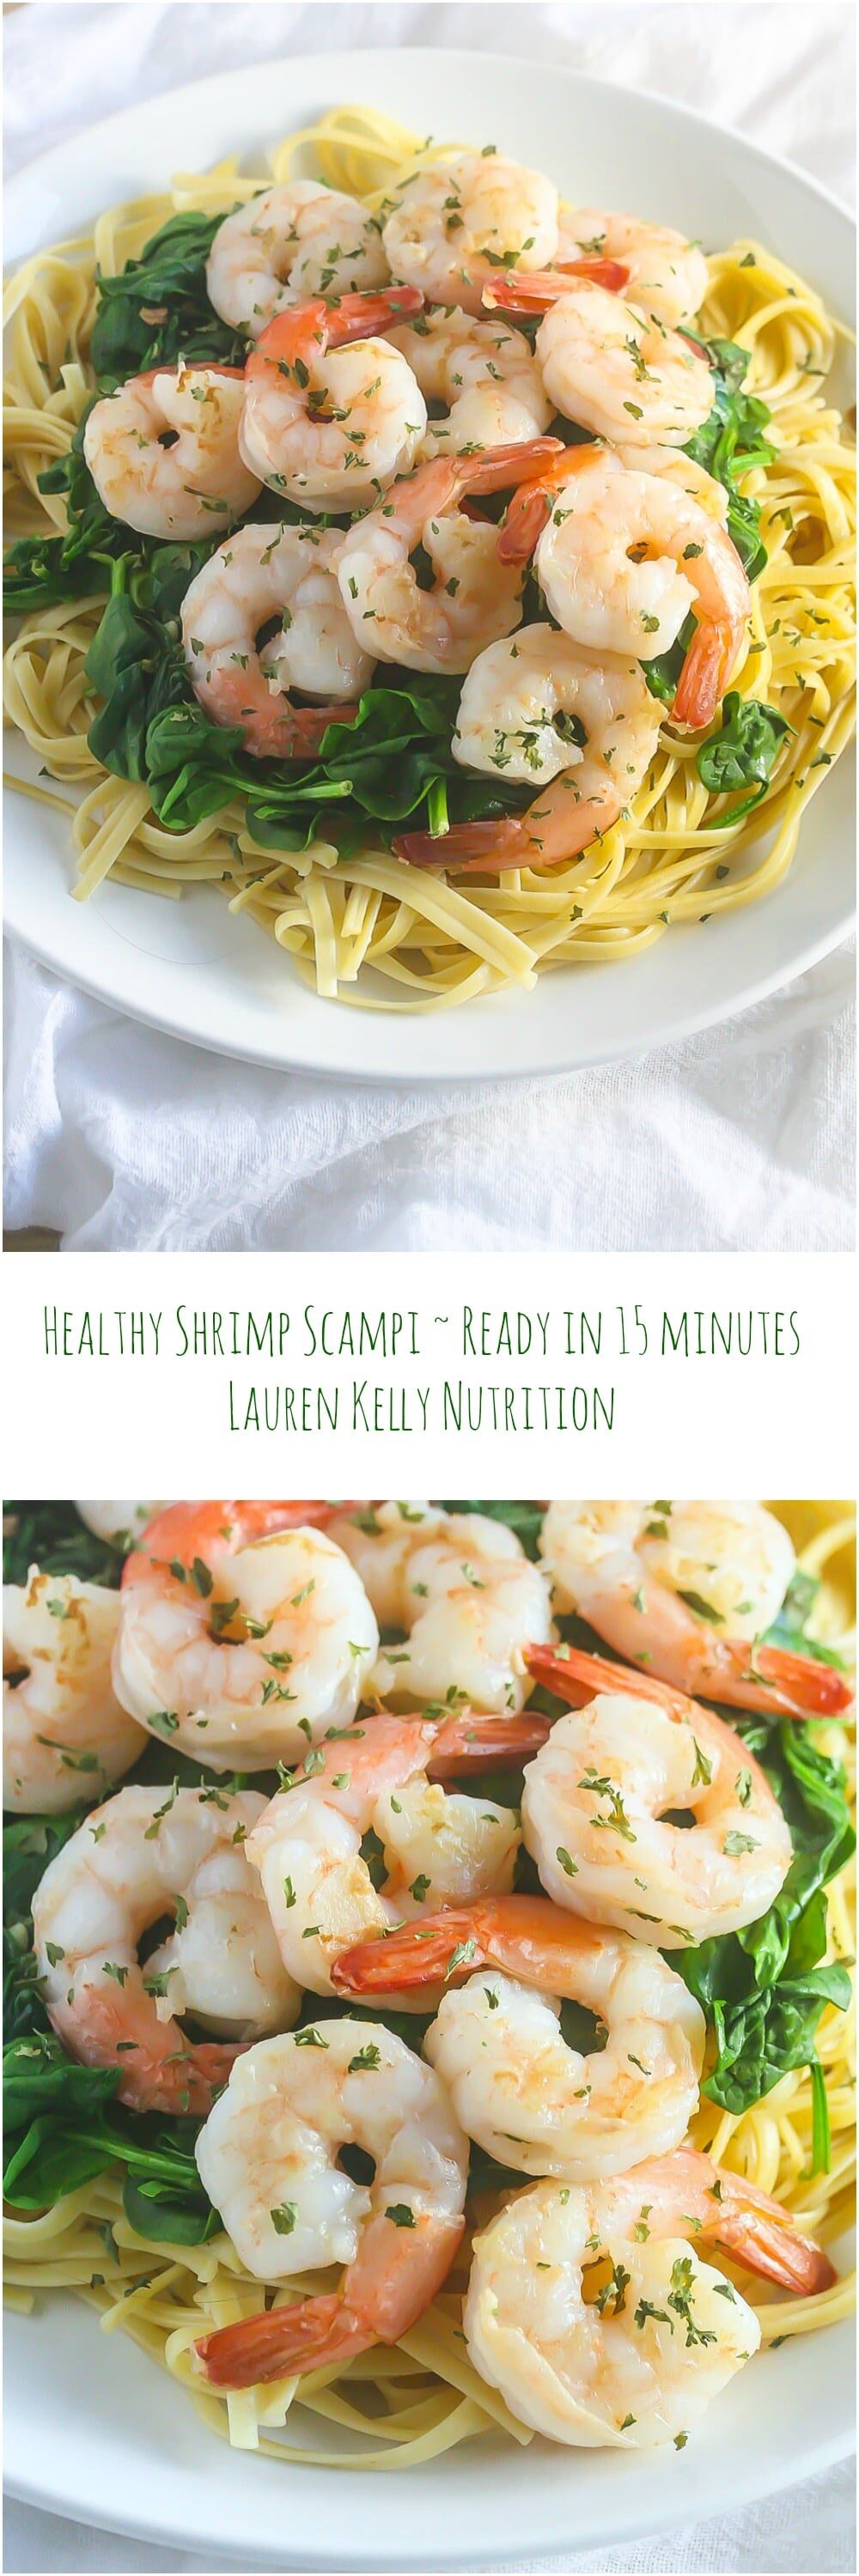 This Healthy Shrimp Scampi is so delicious and is ready in 15 minutes! www.laurenkellynutrition.com